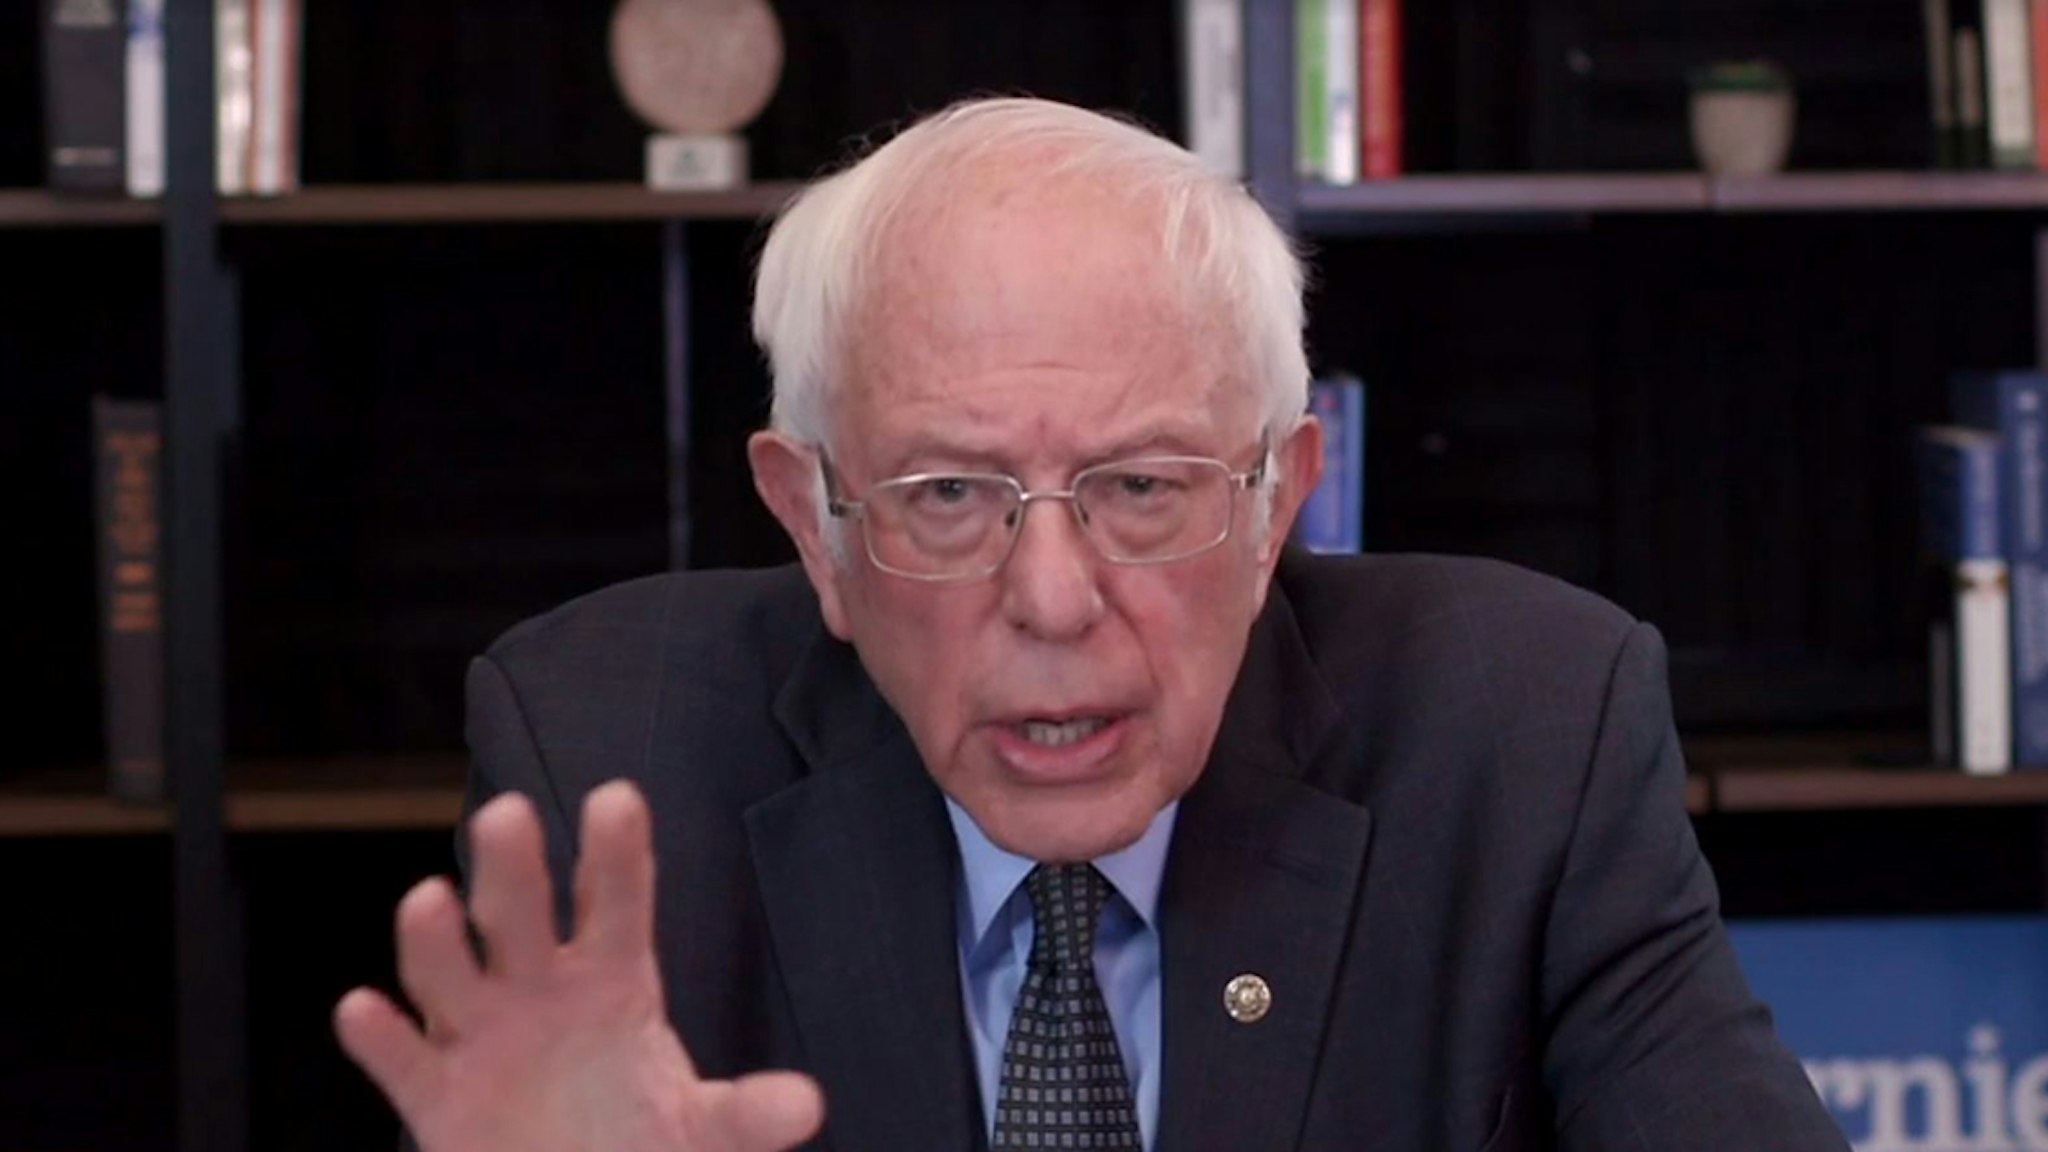 WASHINGTON, DC - MARCH 17: In this screengrab taken from a berniesanders.com webcast, Democratic presidential candidate Sen. Bernie Sanders (I-VT) talks about his plan to deal with the coronavirus pandemic on March 17, 2020 in Washington, D.C. Businesses are being severely impacted, schools are closing temporarily and large events are being postponed as the COVID-19 virus continues to spread across the country. (Photo by berniesanders.com via Getty Images)